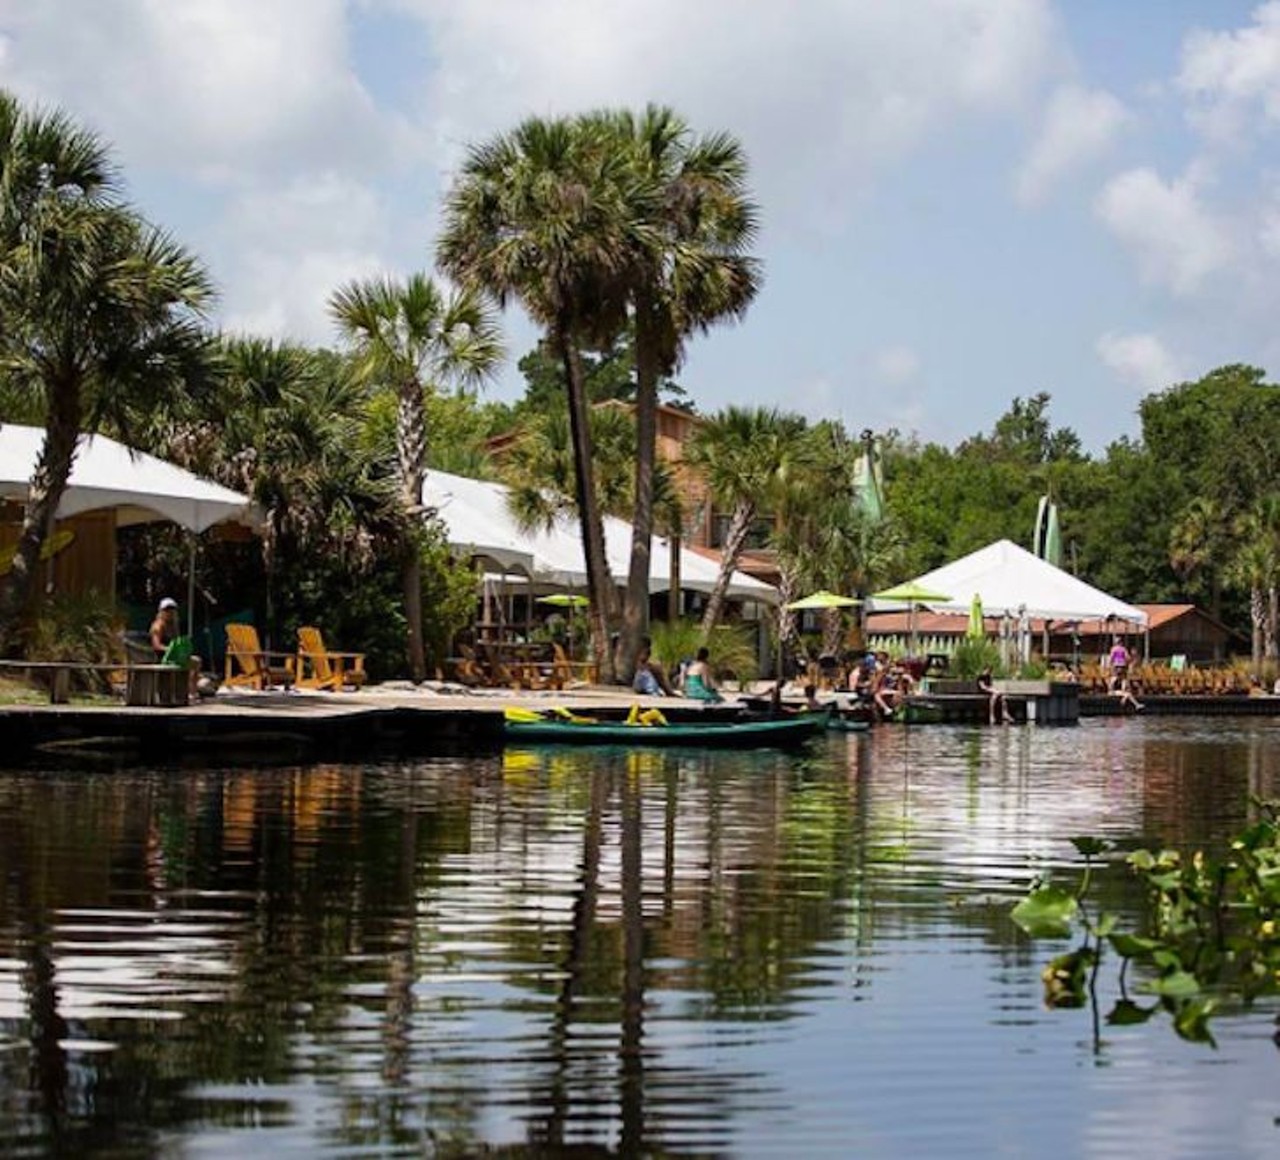 Rent a canoe at Wekiva Island
1014 Miami Springs Dr, Longwood, FL (407) 862-1500 
Head to Wekiva Island after noon to score canoe rentals for only $25. Cruise down the Wekiva River and get a first-hand look at the Florida scenery that surrounds you. The river is also dog-friendly and swimming is permitted if you want to skip the rental fee. 
Photo via Wekiva Island/Facebook